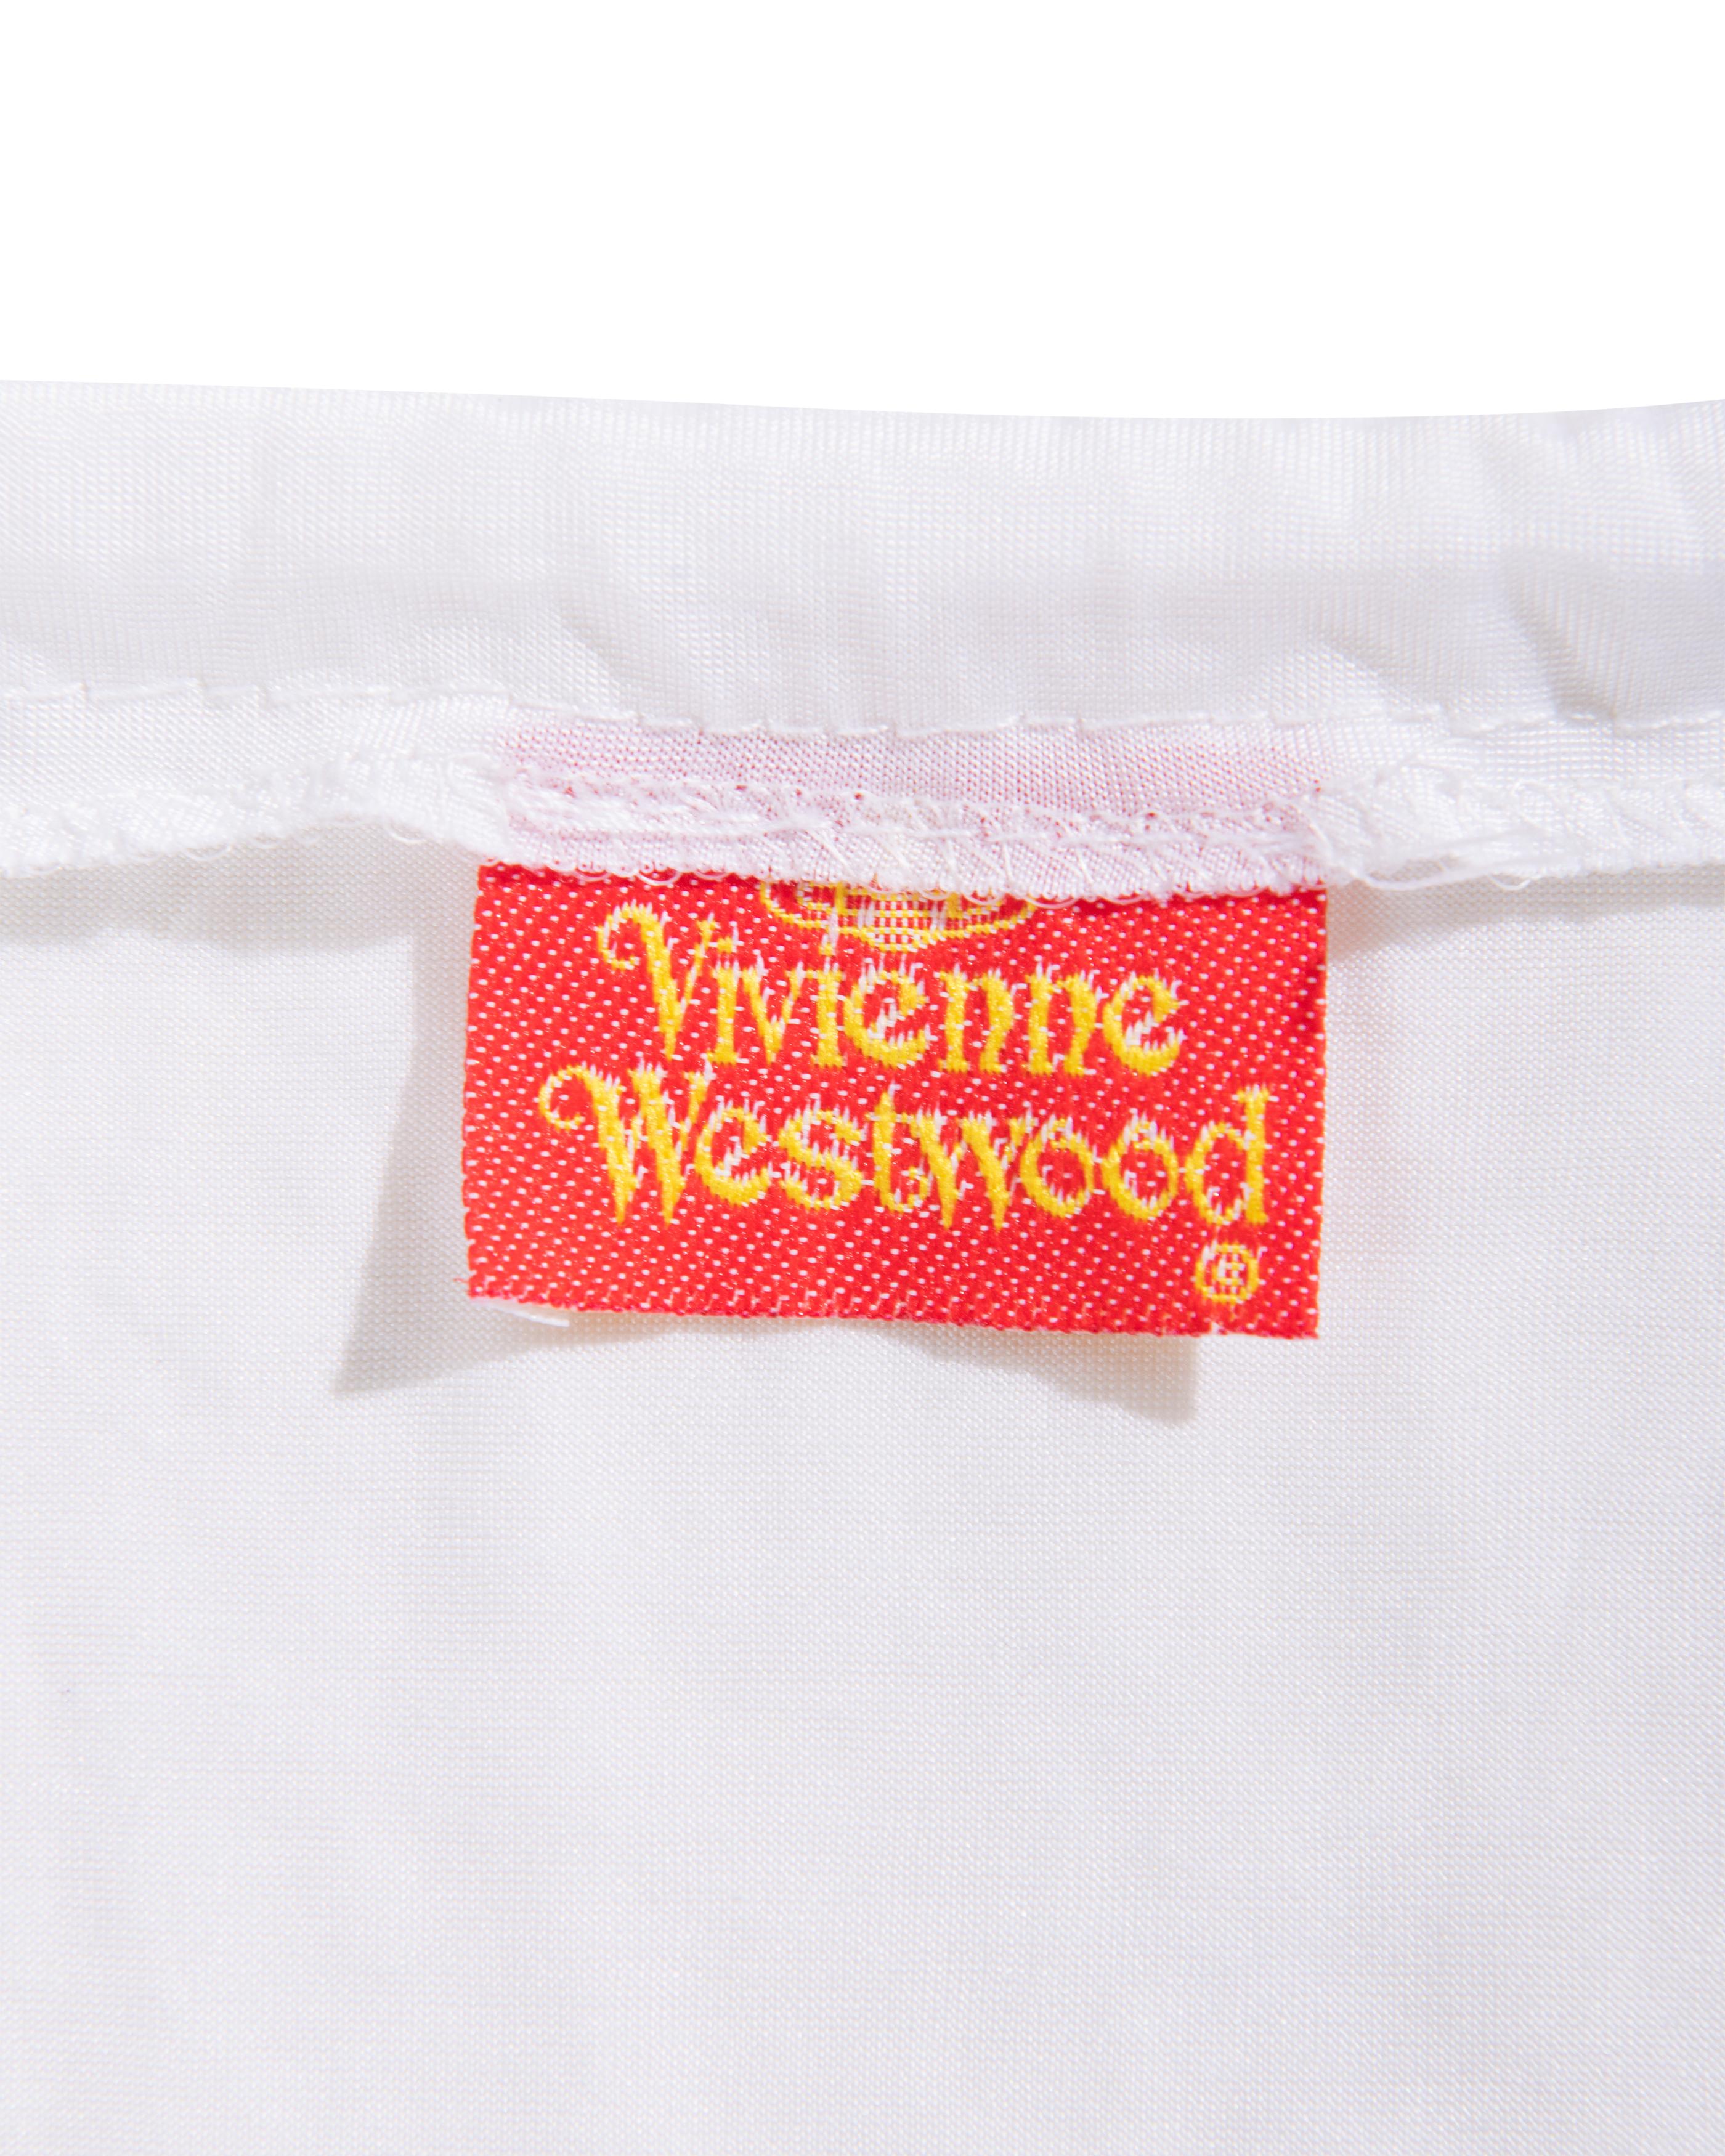 S/S 1988 Vivienne Westwood White Mini Skirt with Removable Bustle 7